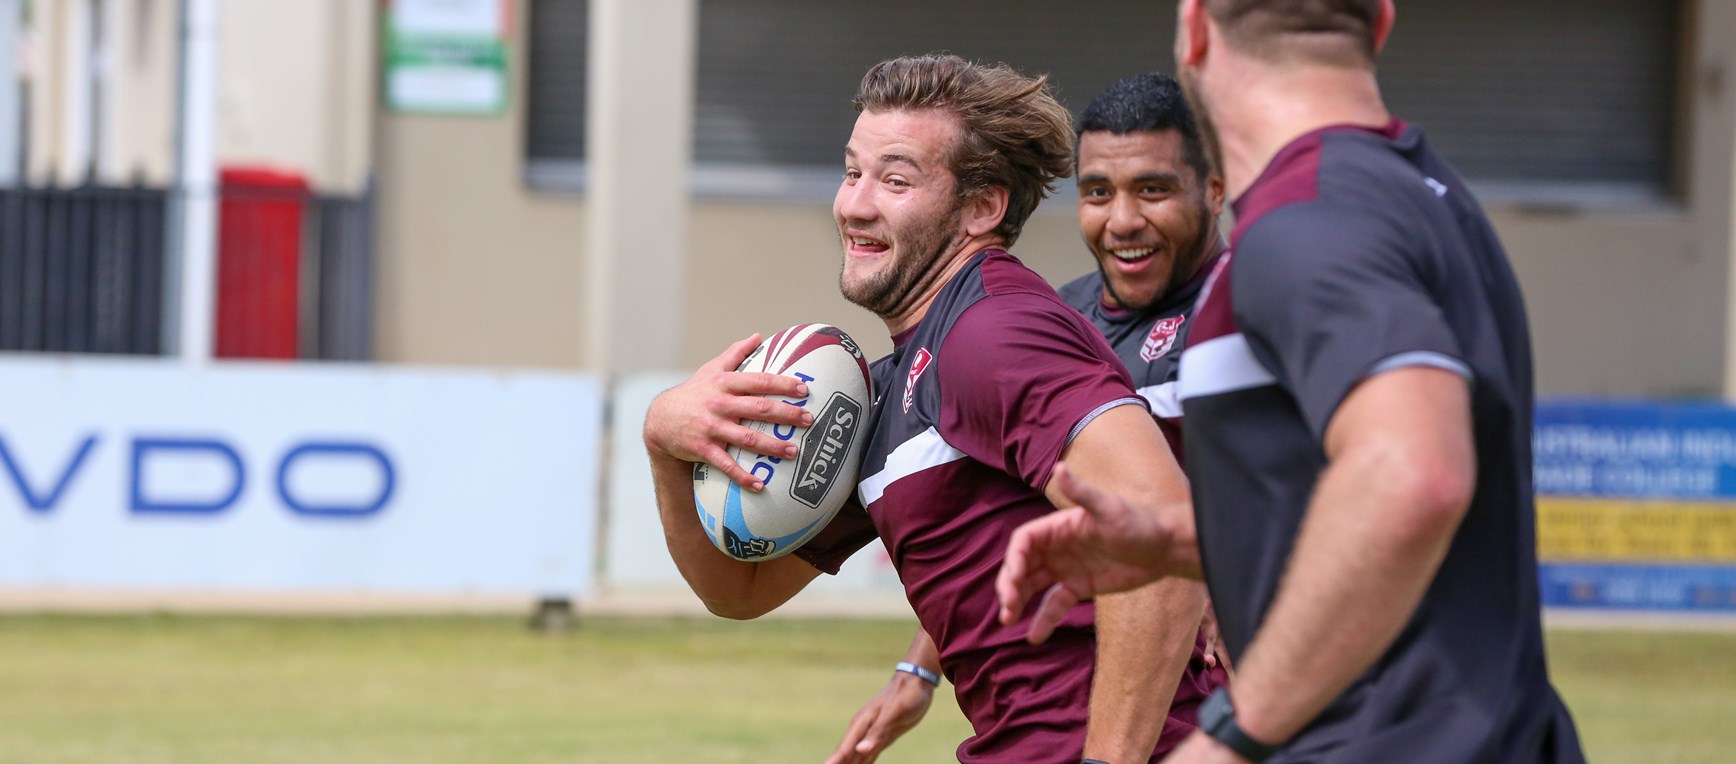 In pictures: Pre-camp training for Maroons squad members